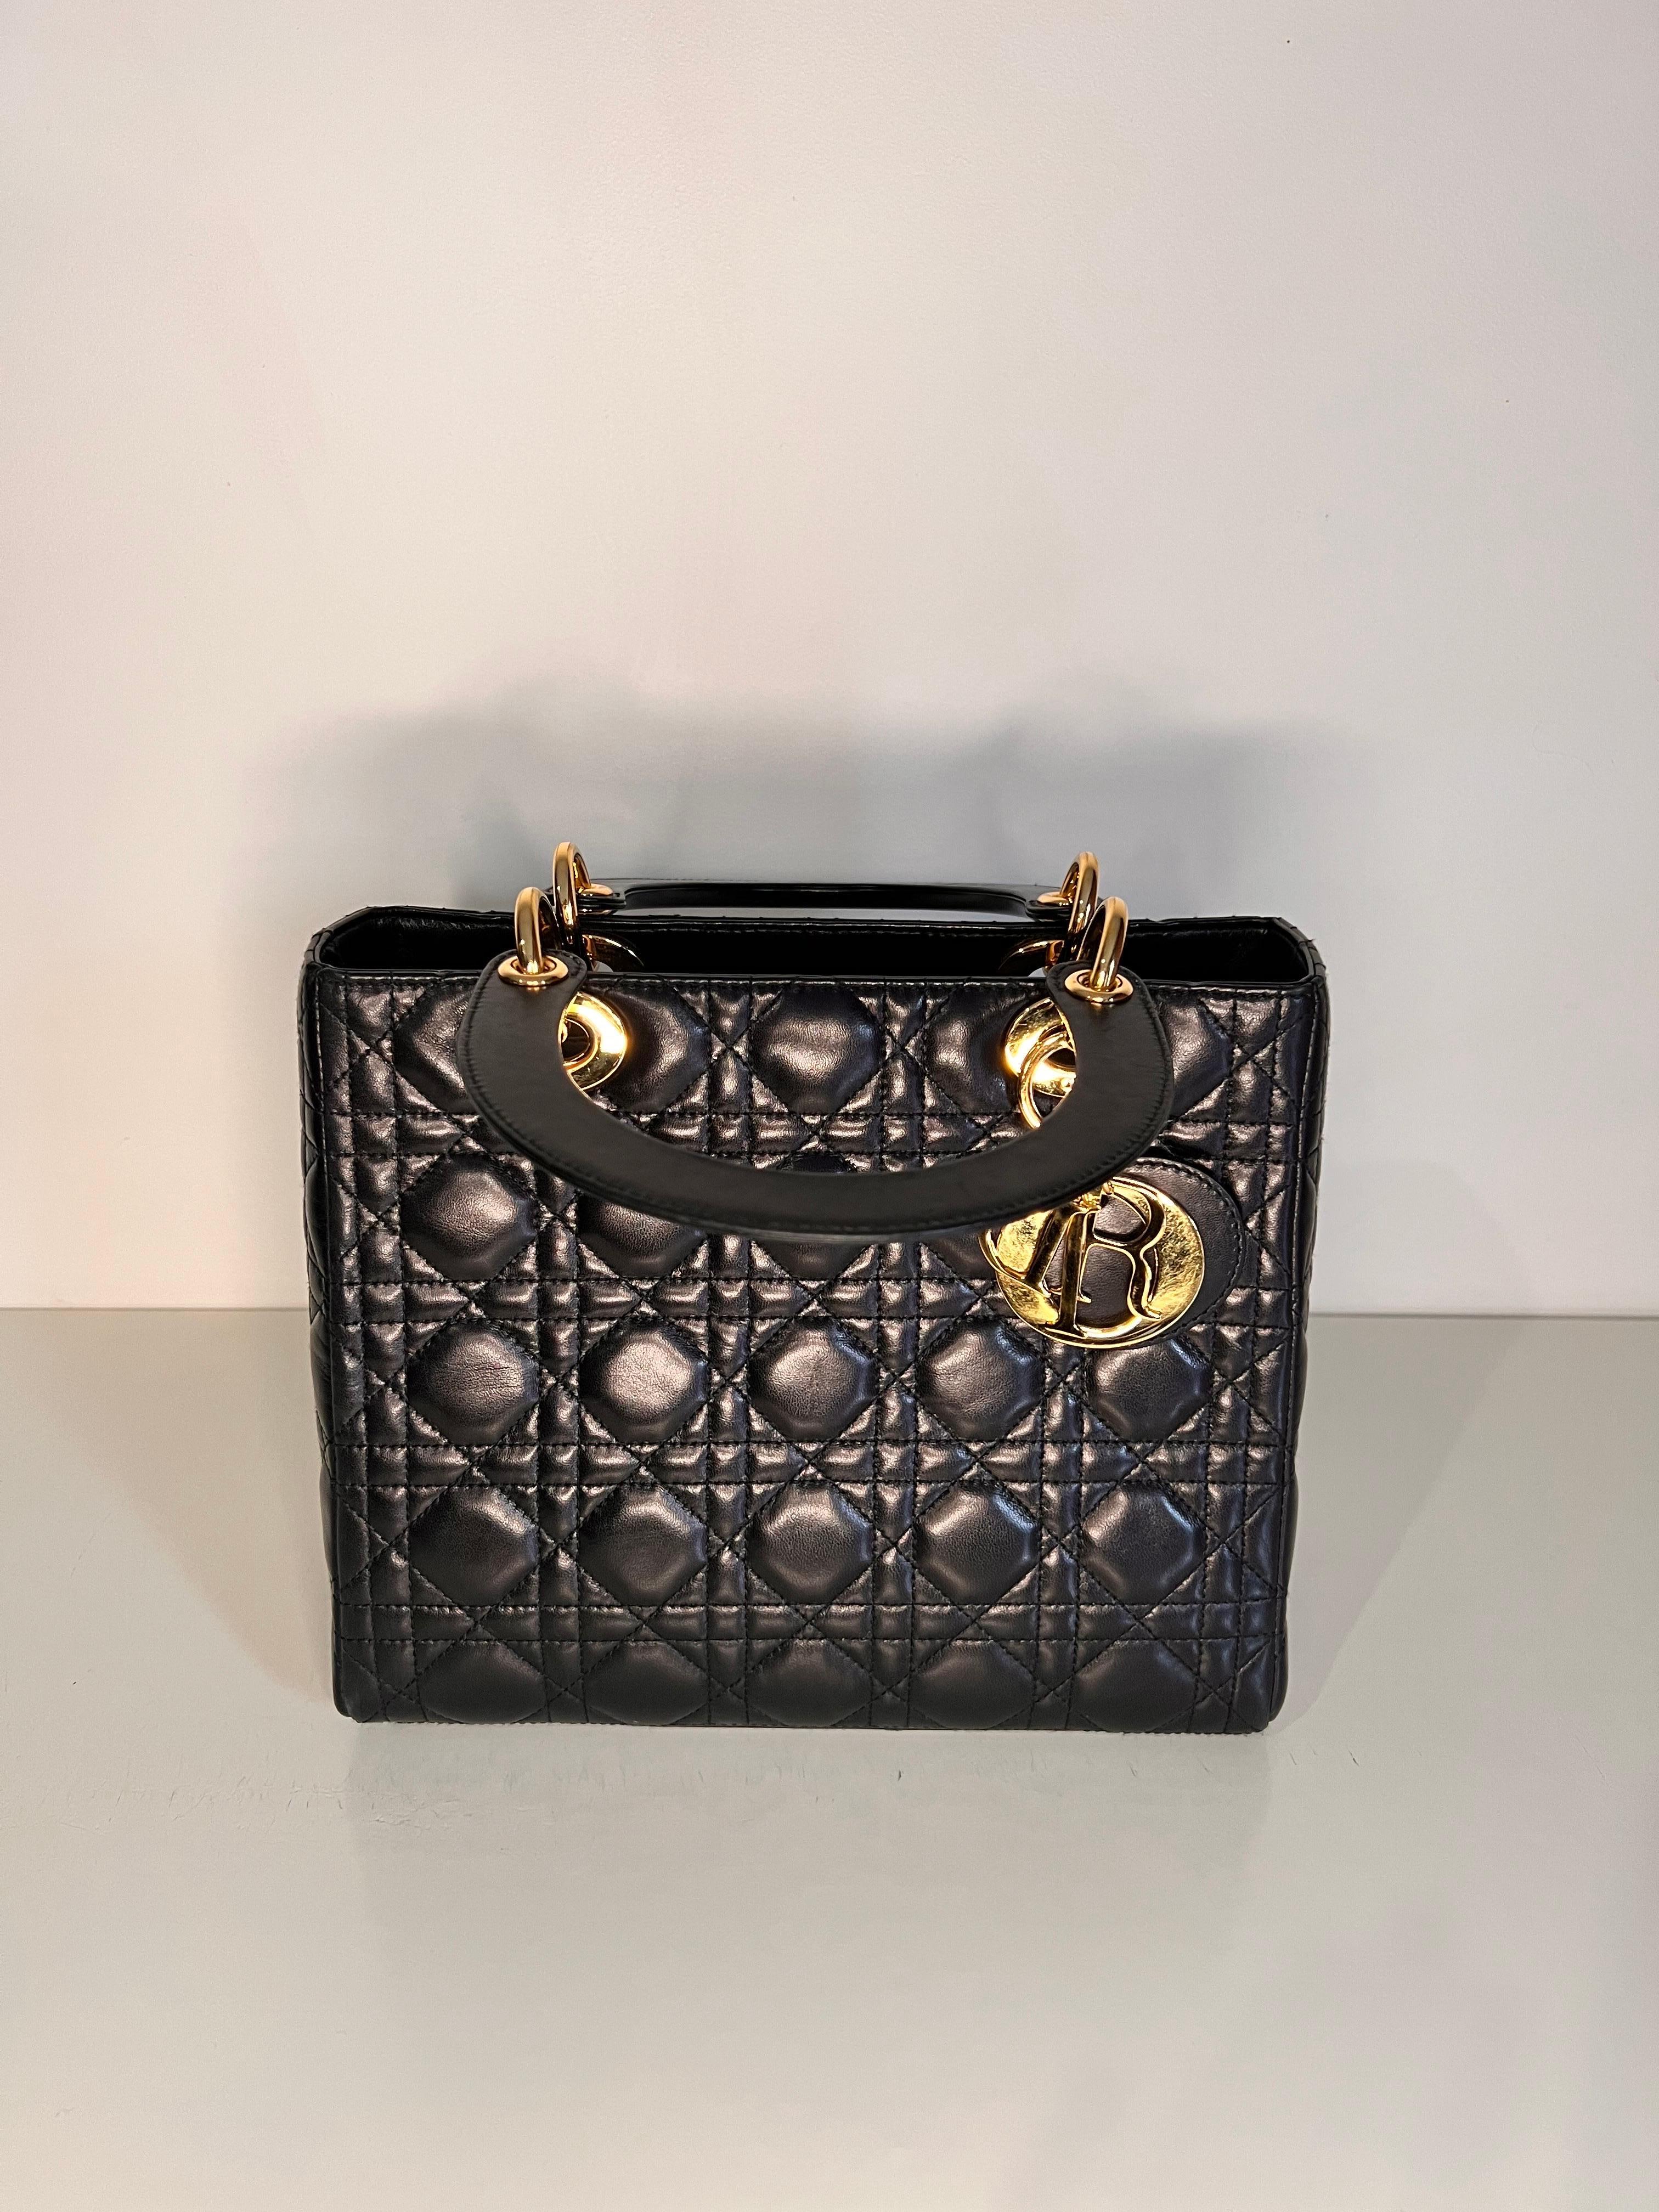 Women's or Men's Lady DIOR quilted handbag with gold hardware, famously worn by Princess Diana 